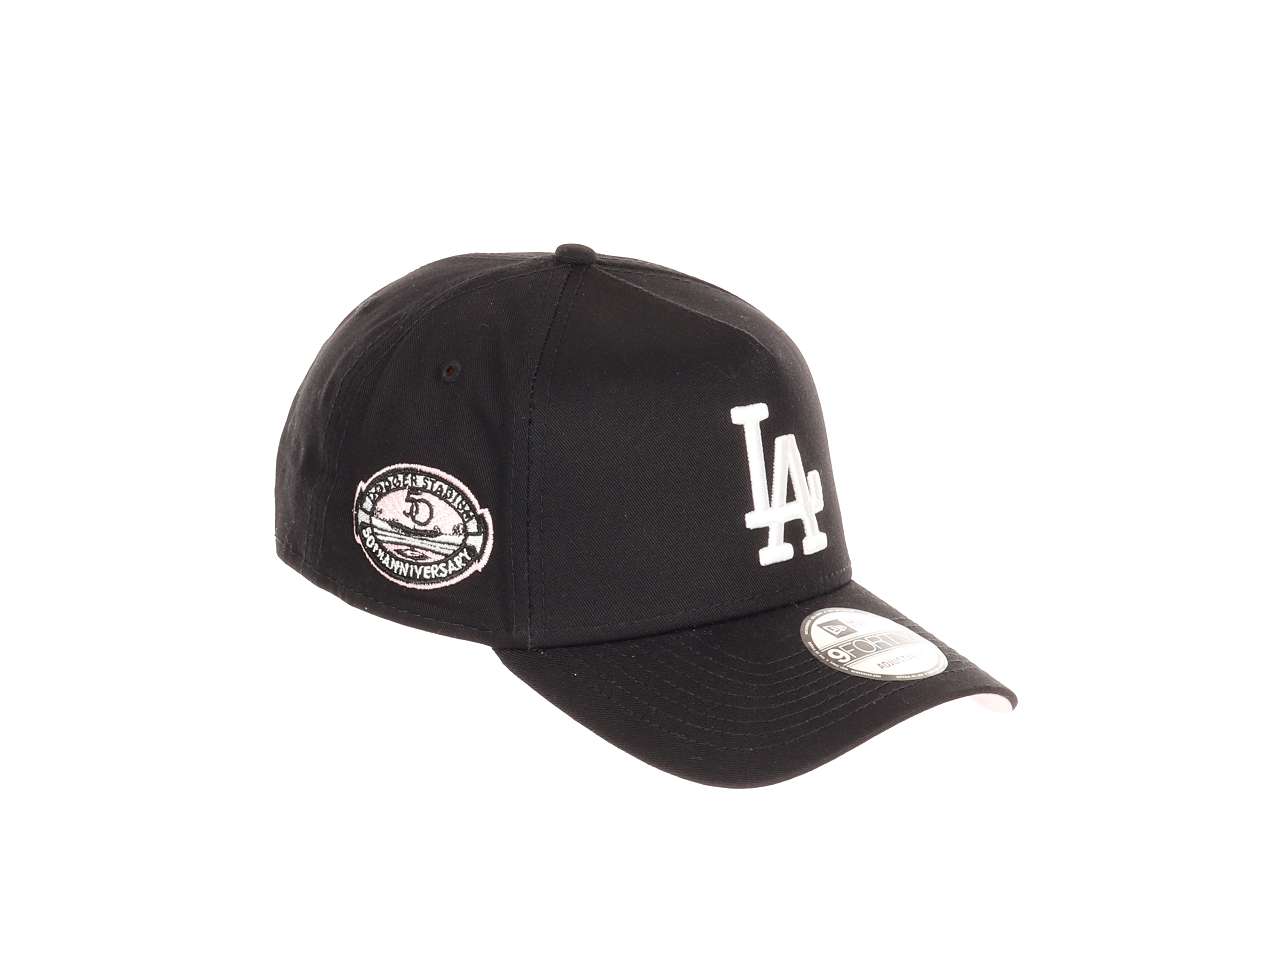 Los Angeles Dodgers MLB  Dogdger Stadium 50th Anniversary  Sidepatch Black 9Forty A-Frame Adjustable Cap New Era